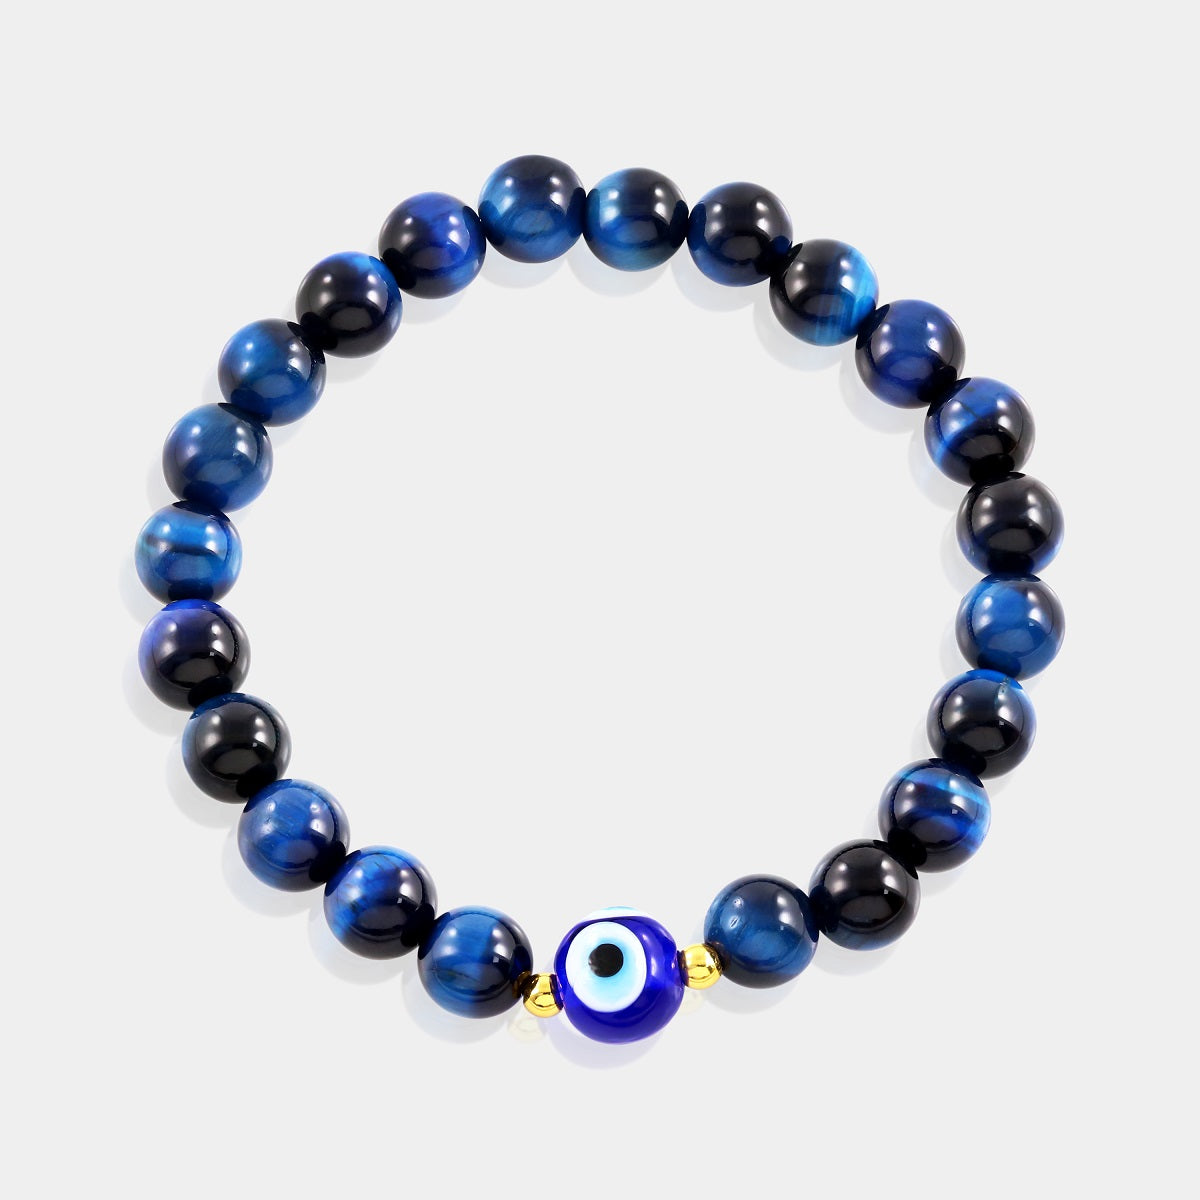 Smooth Round Blue Tiger's Eye Beads with Calming Blue Hues